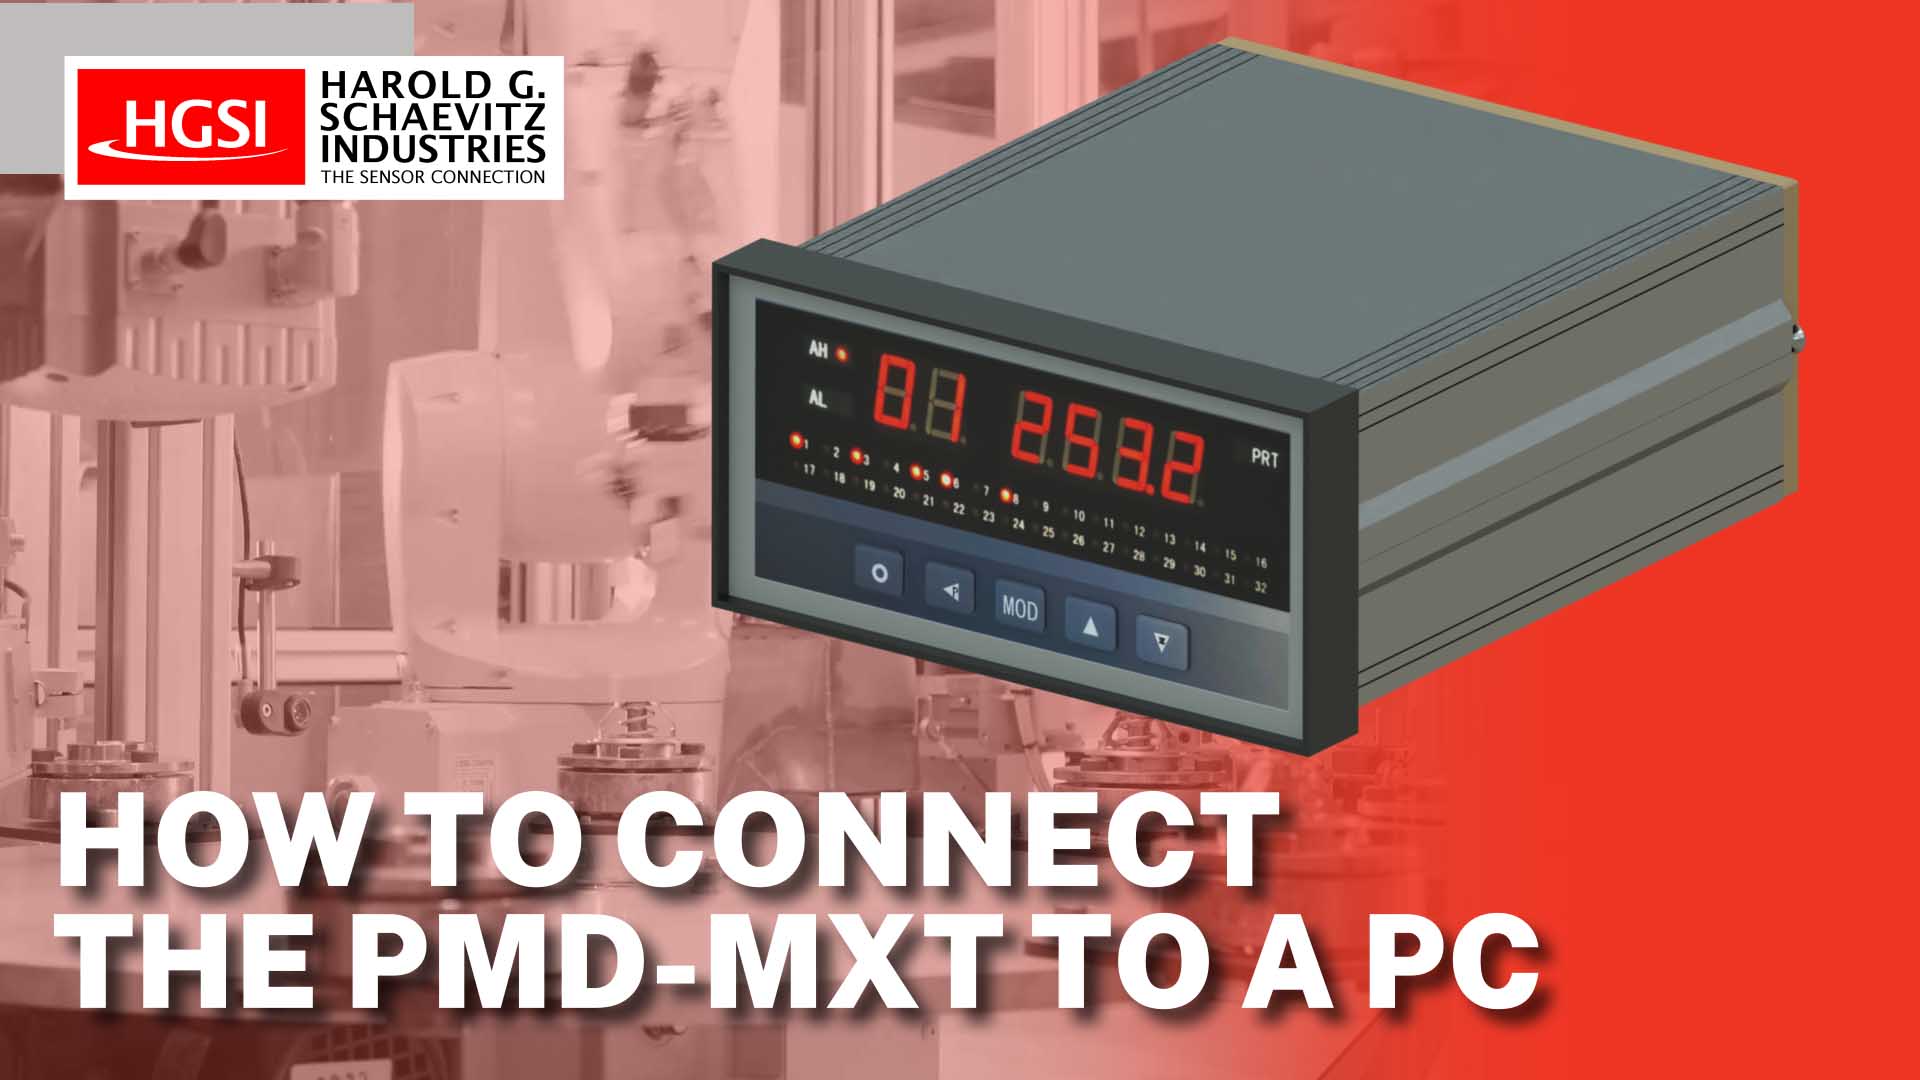 How to Connect the PMD-MXT Temperature Scanner to a PC